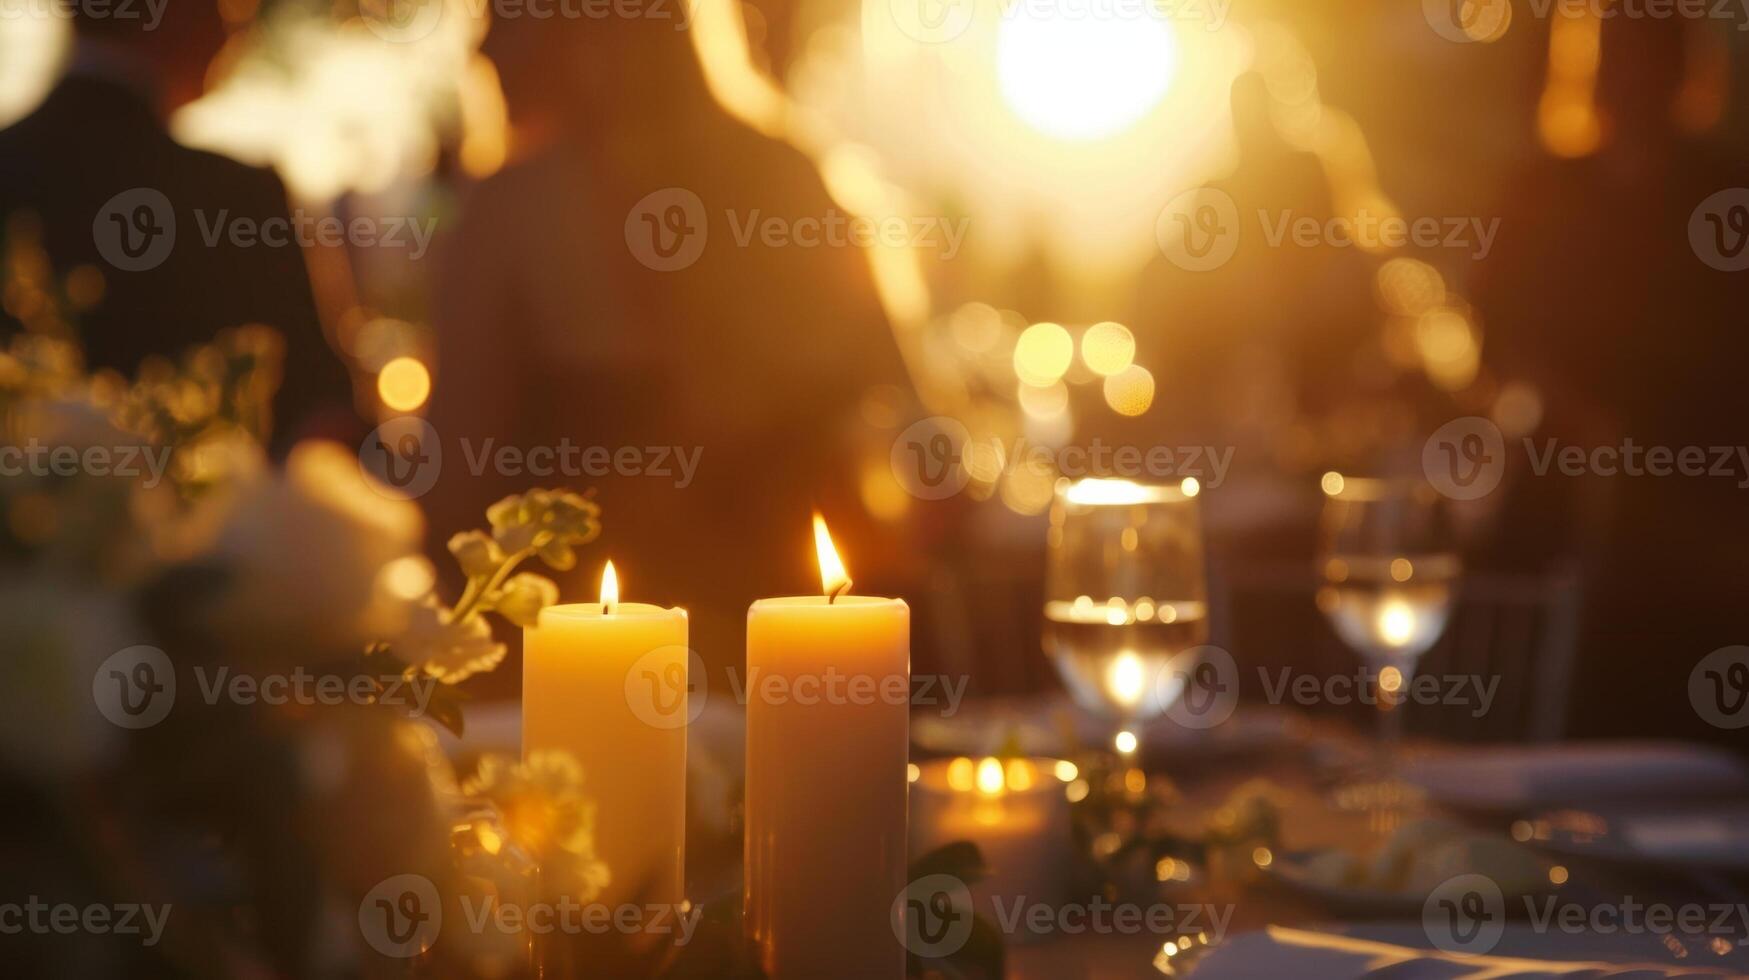 Soft golden light from the candles casting playful shadows on the faces of the attendees creating a warm and intimate atmosphere. 2d flat cartoon photo